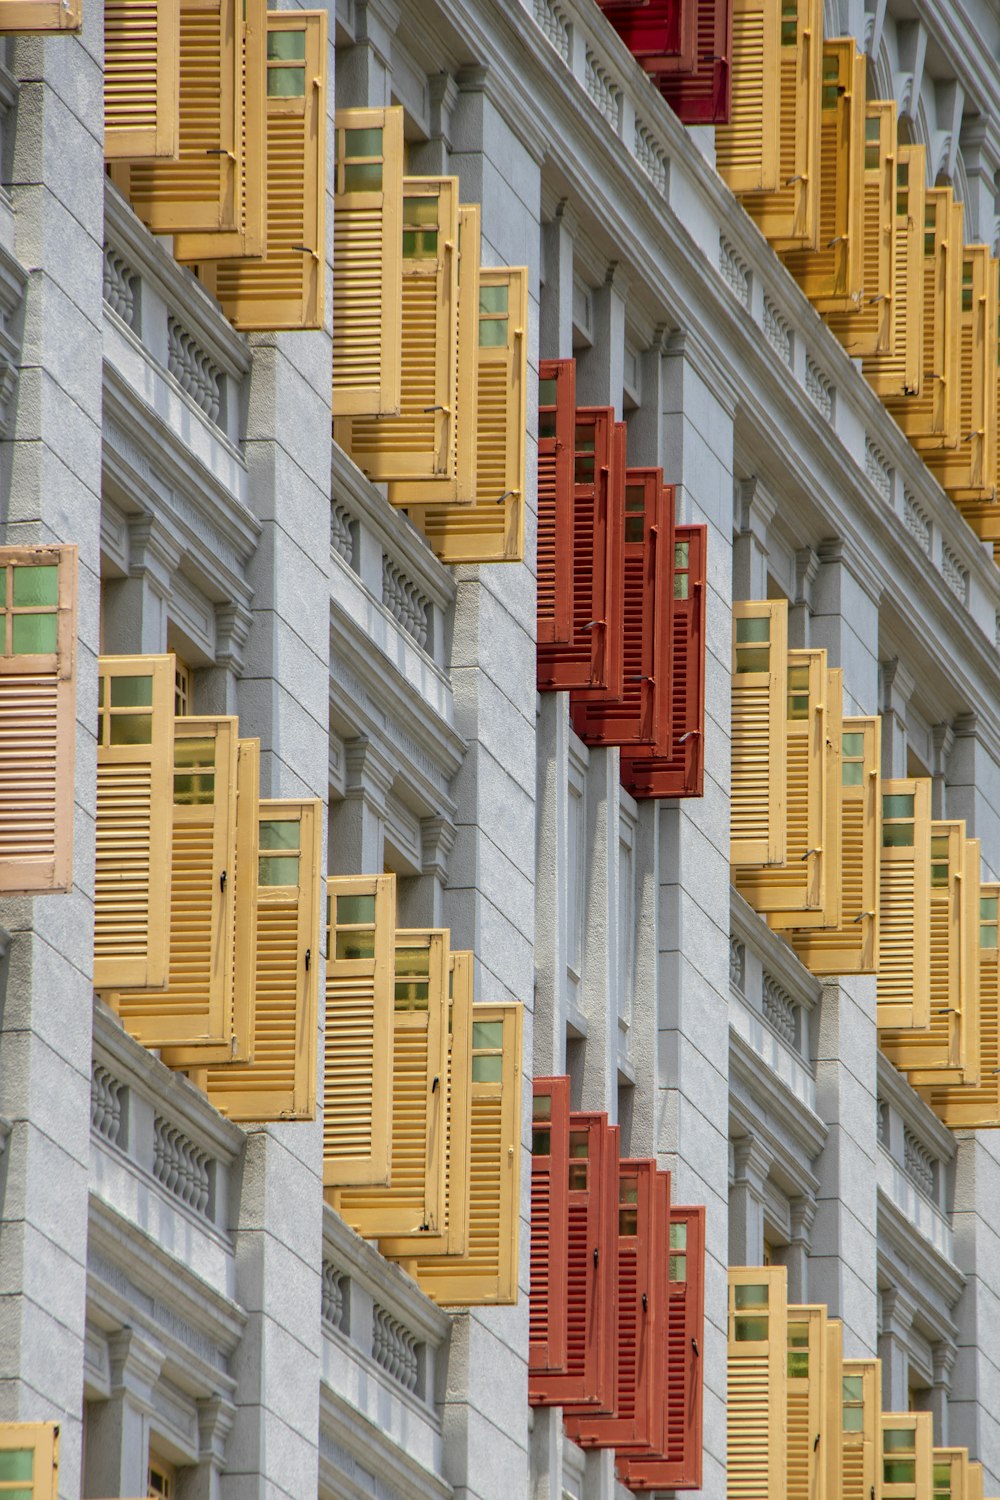 a building with many windows and yellow and red shutters